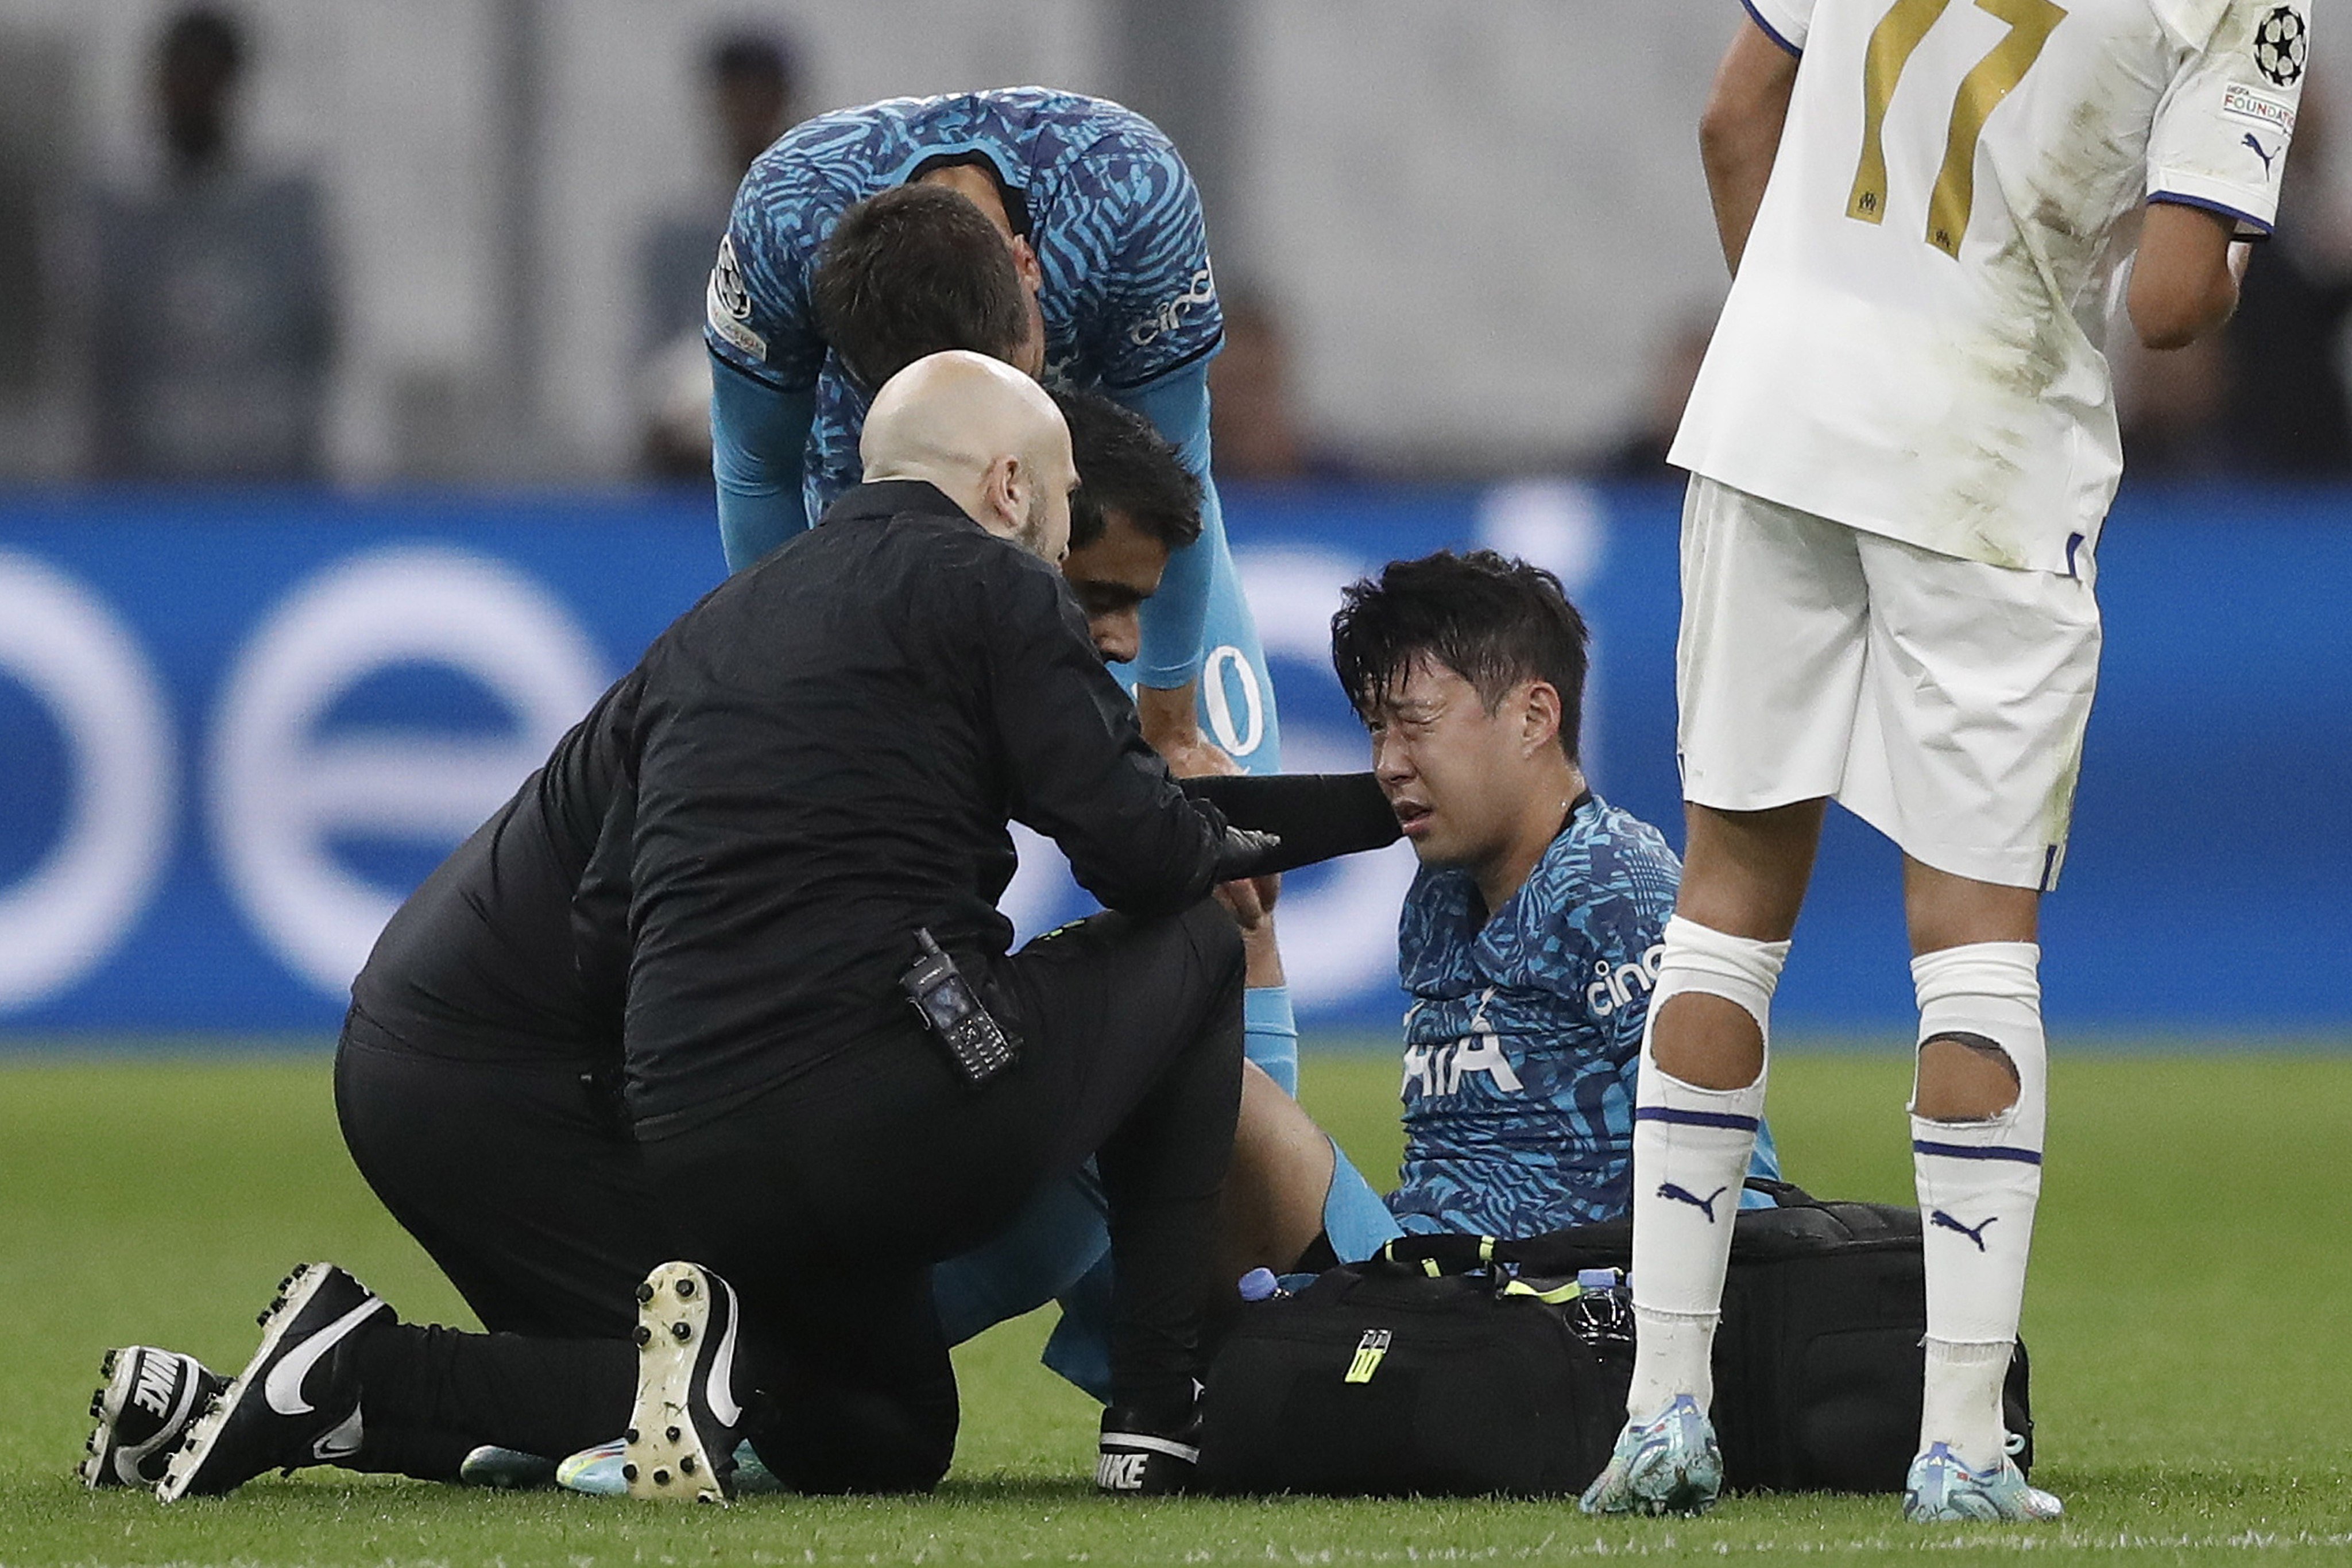 Son Heung-min receives medical assistance during the UEFA Champions League group D match. Photo: EPA-EFE